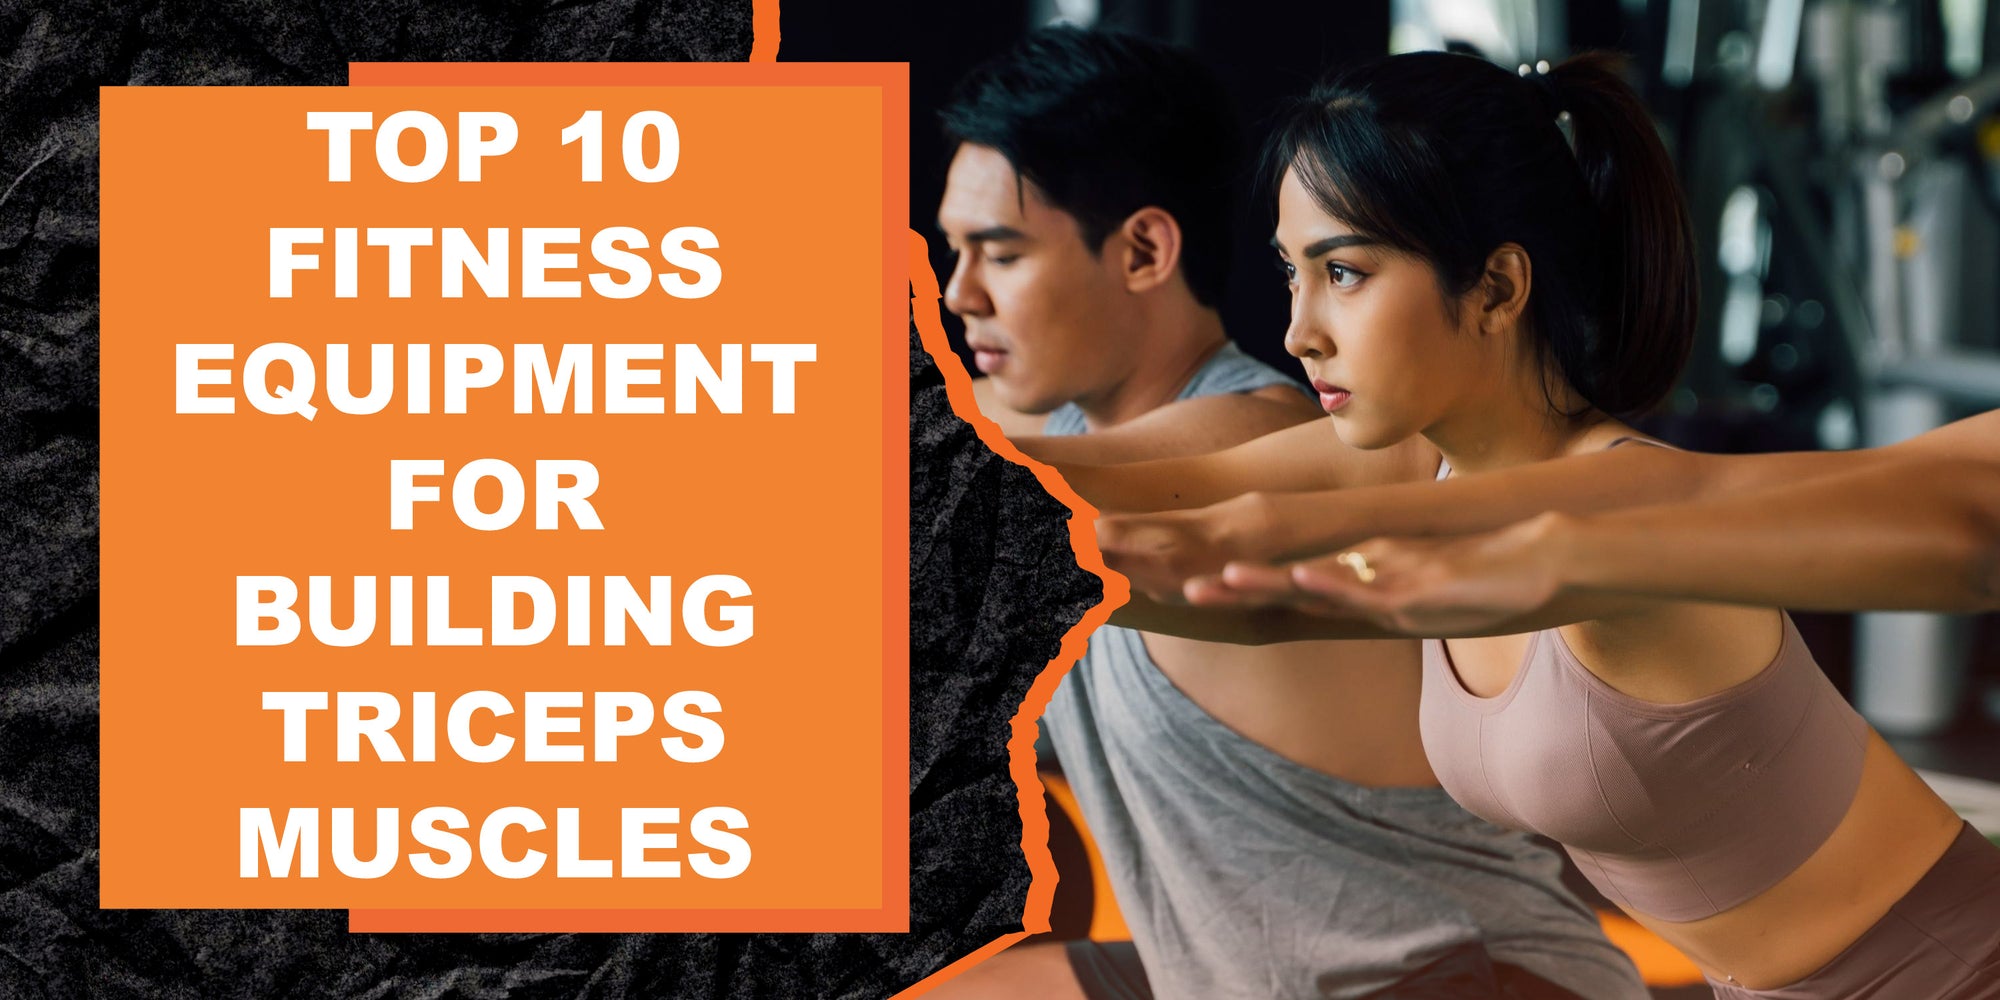 Top 10 Fitness Equipment for Building Triceps Muscles